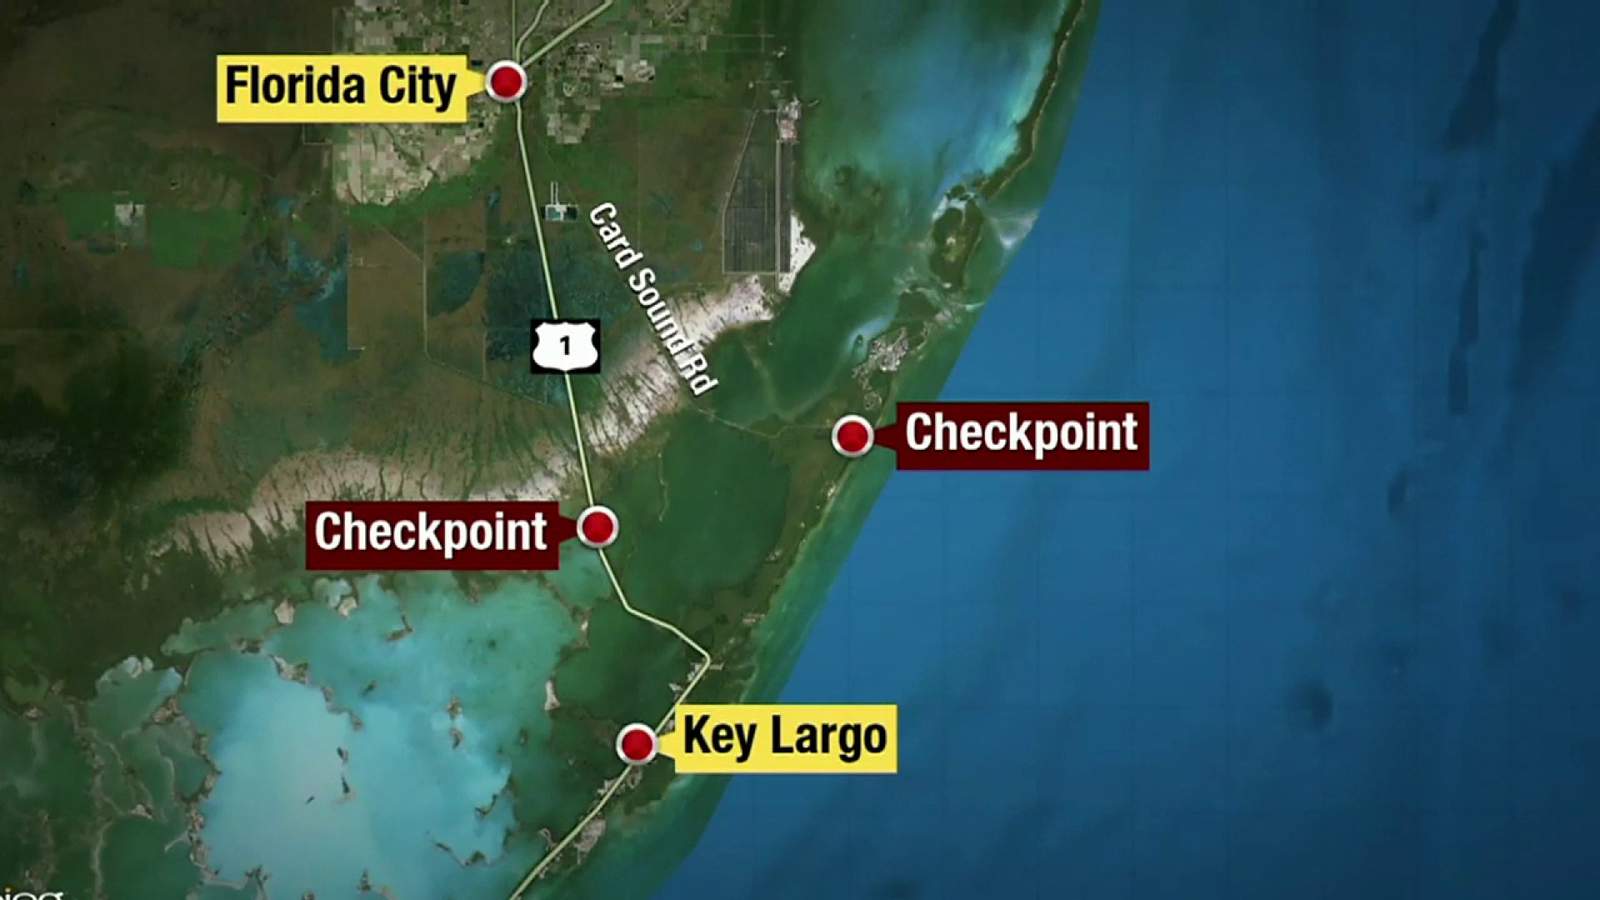 Drivers face 2 checkpoints limiting access to Florida Keys during coronavirus pandemic